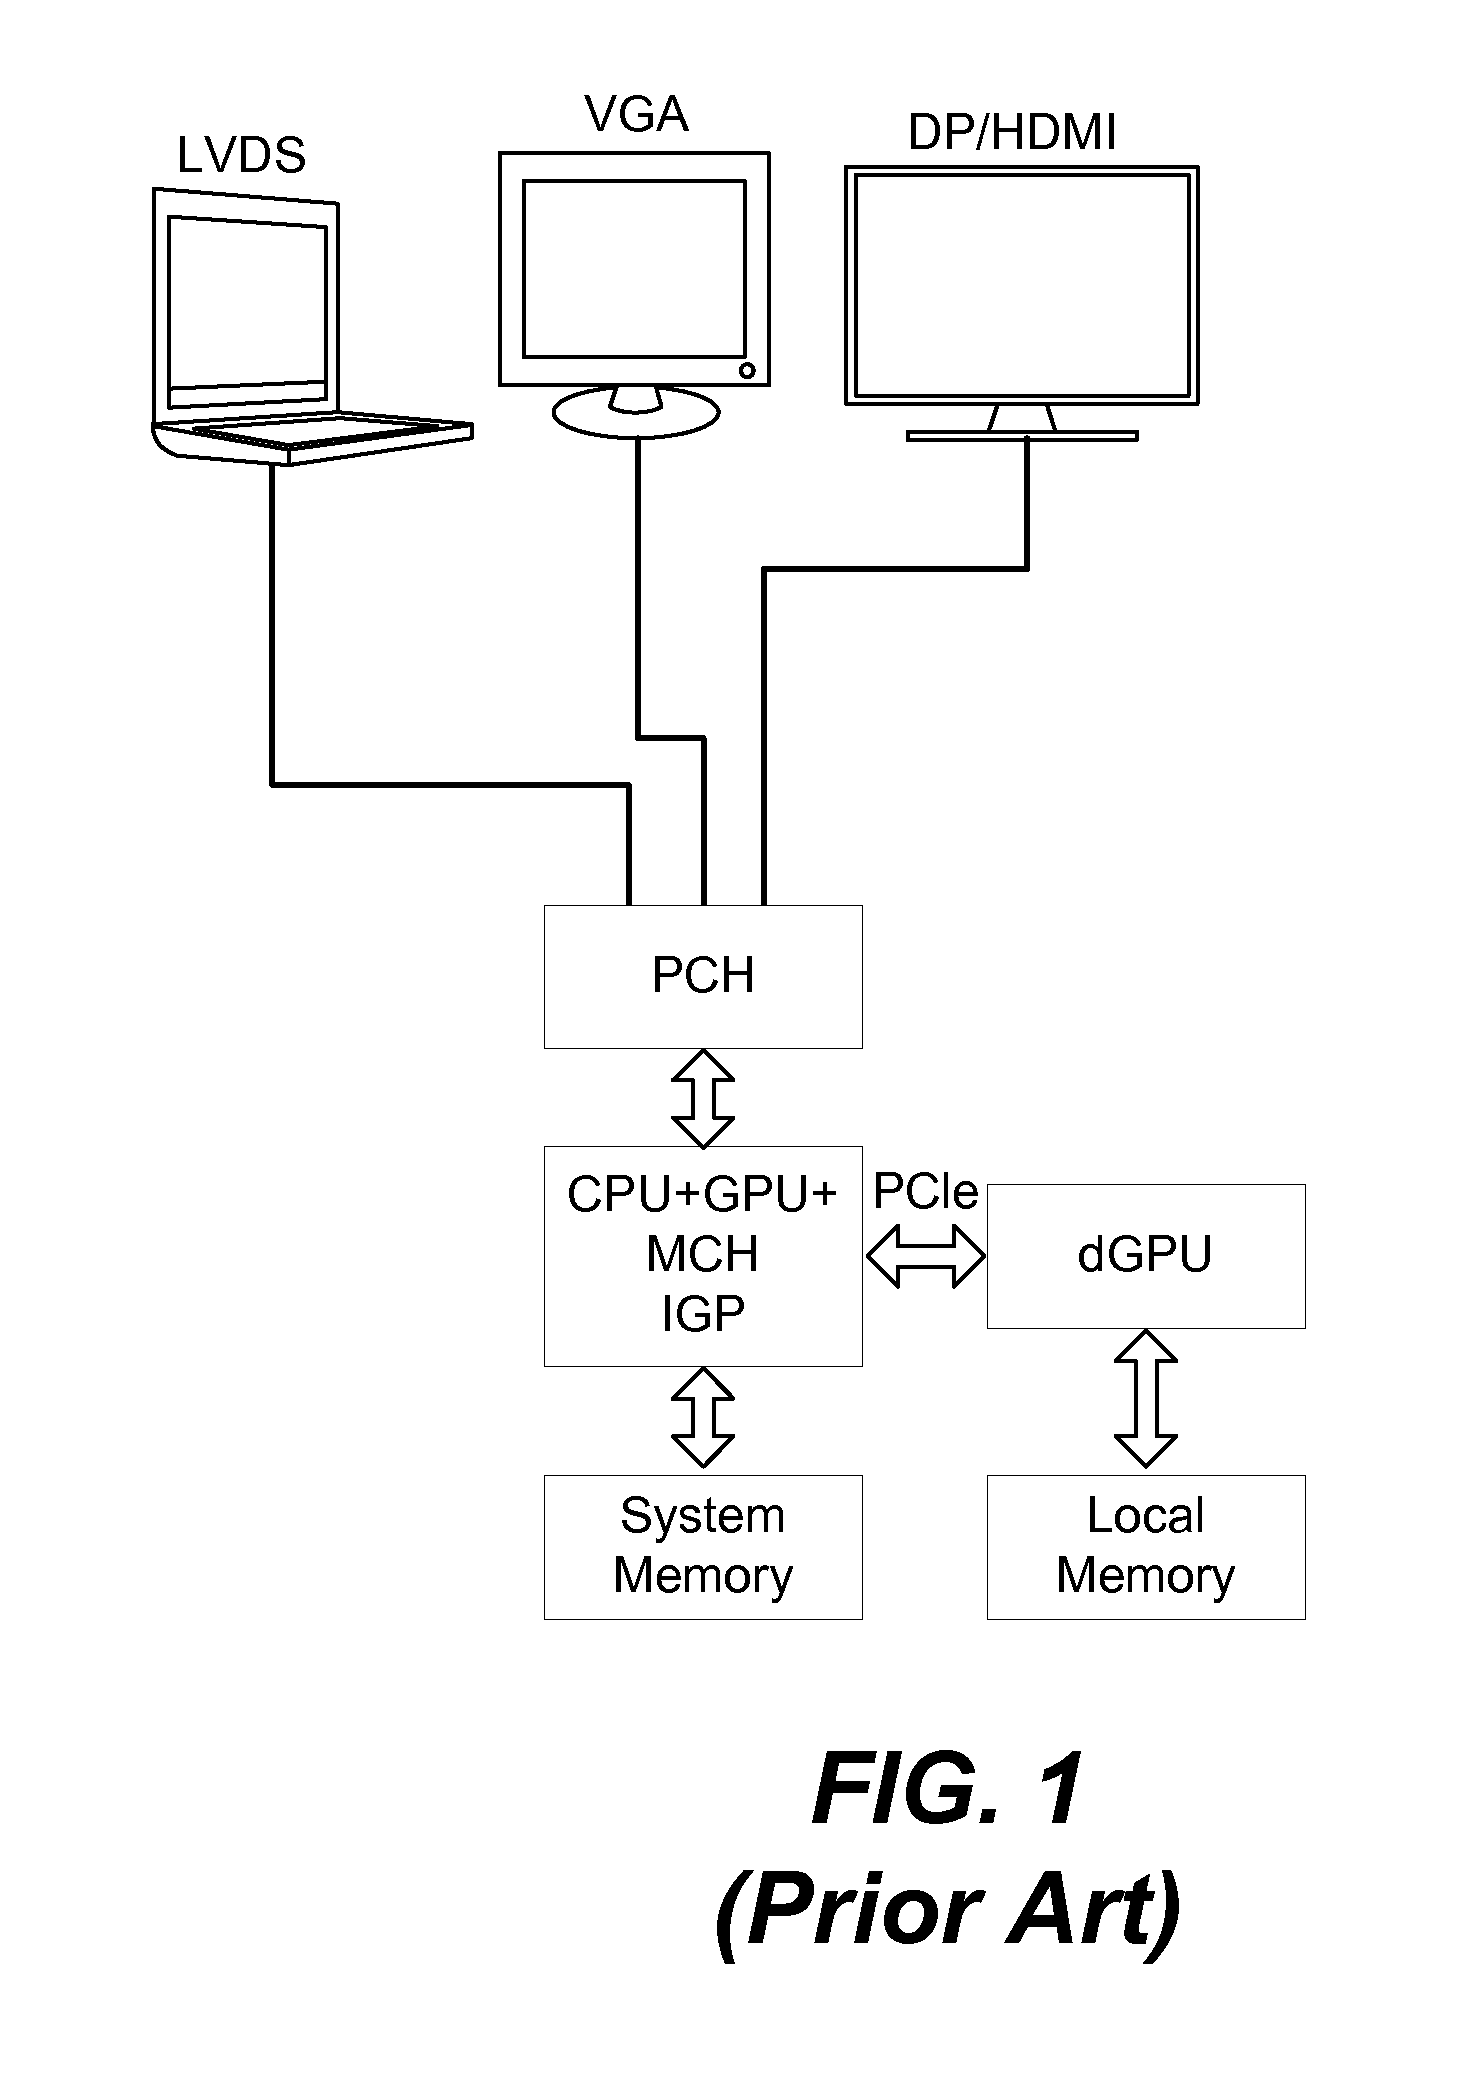 Leveraging compression for display buffer blit in a graphics system having an integrated graphics processing unit and a discrete graphics processing unit